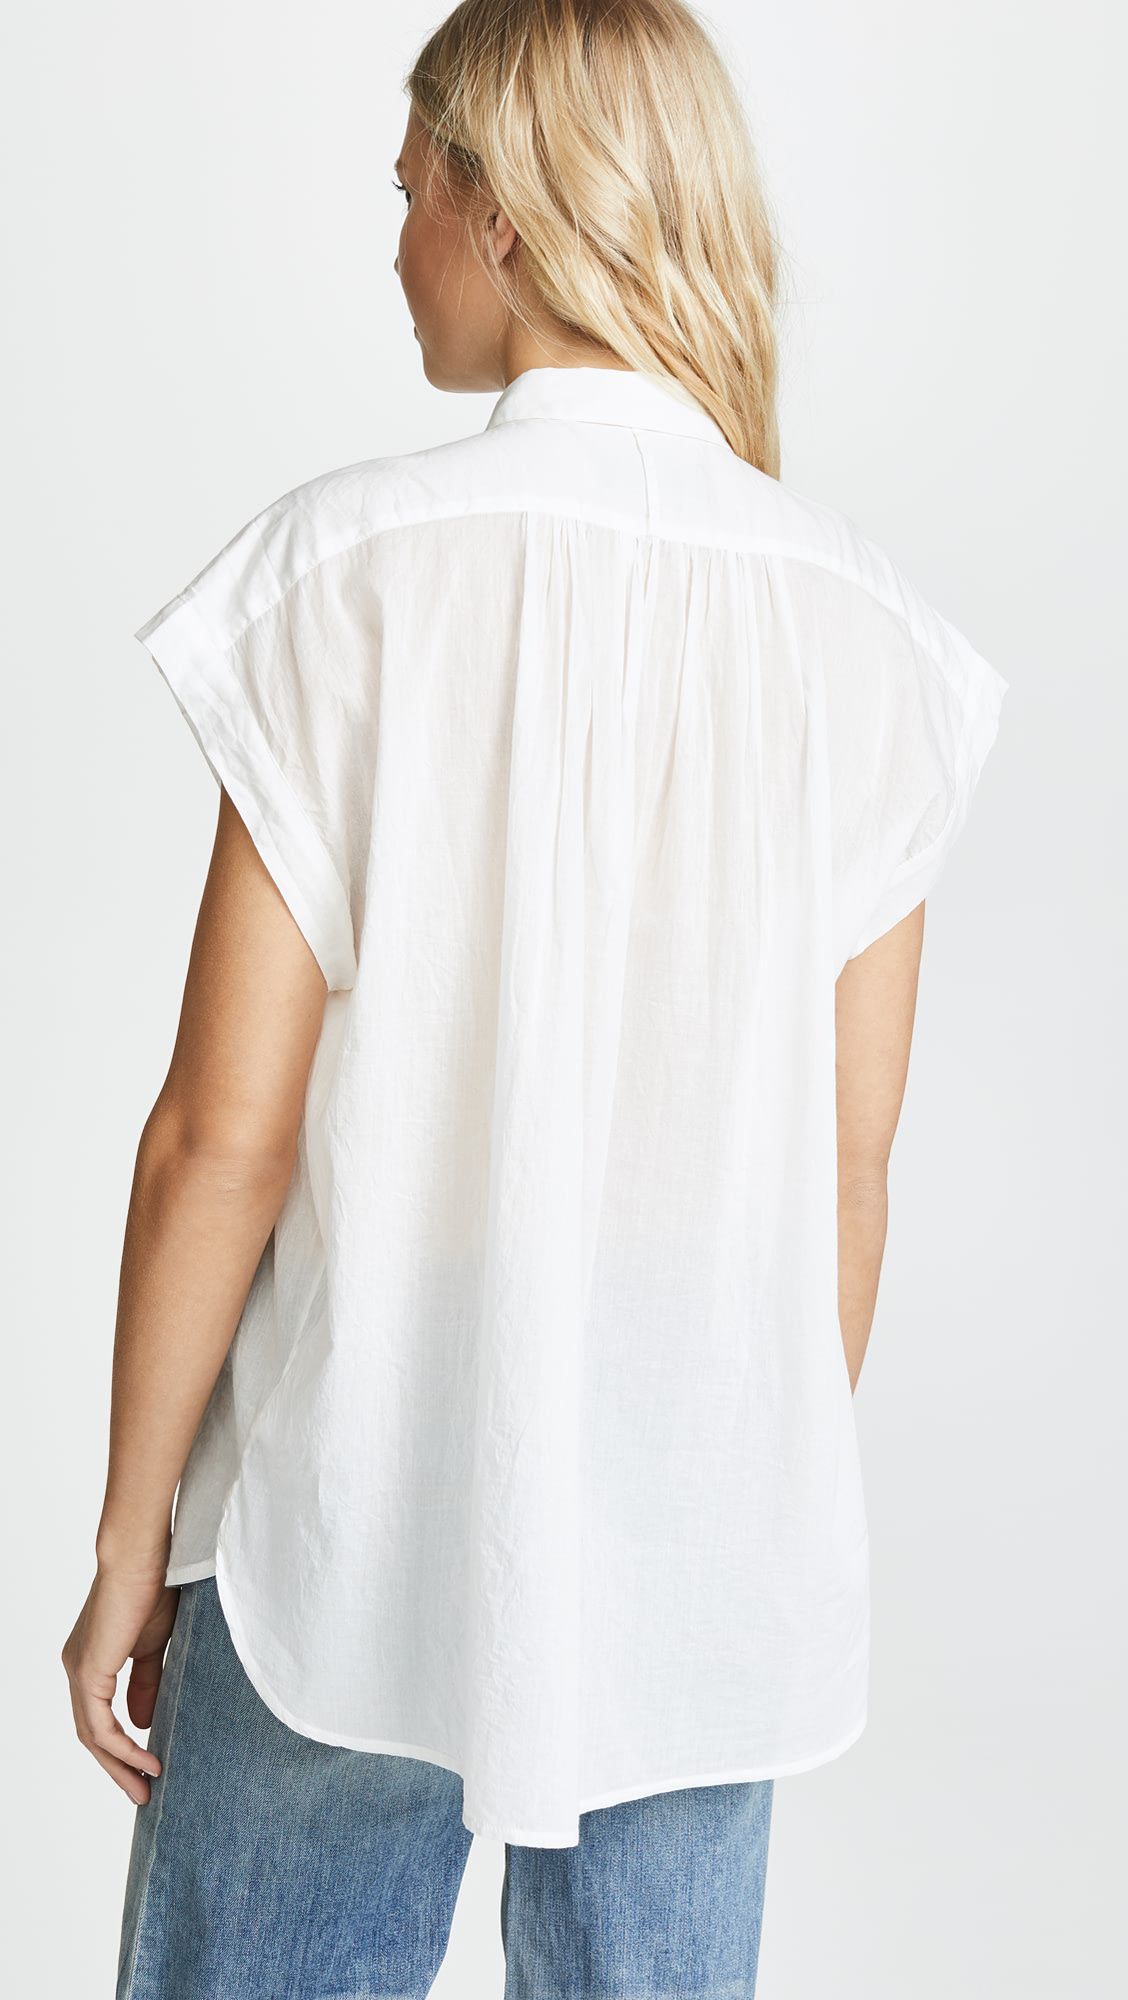 ODM Lapel silhouette pleated white simple shirt